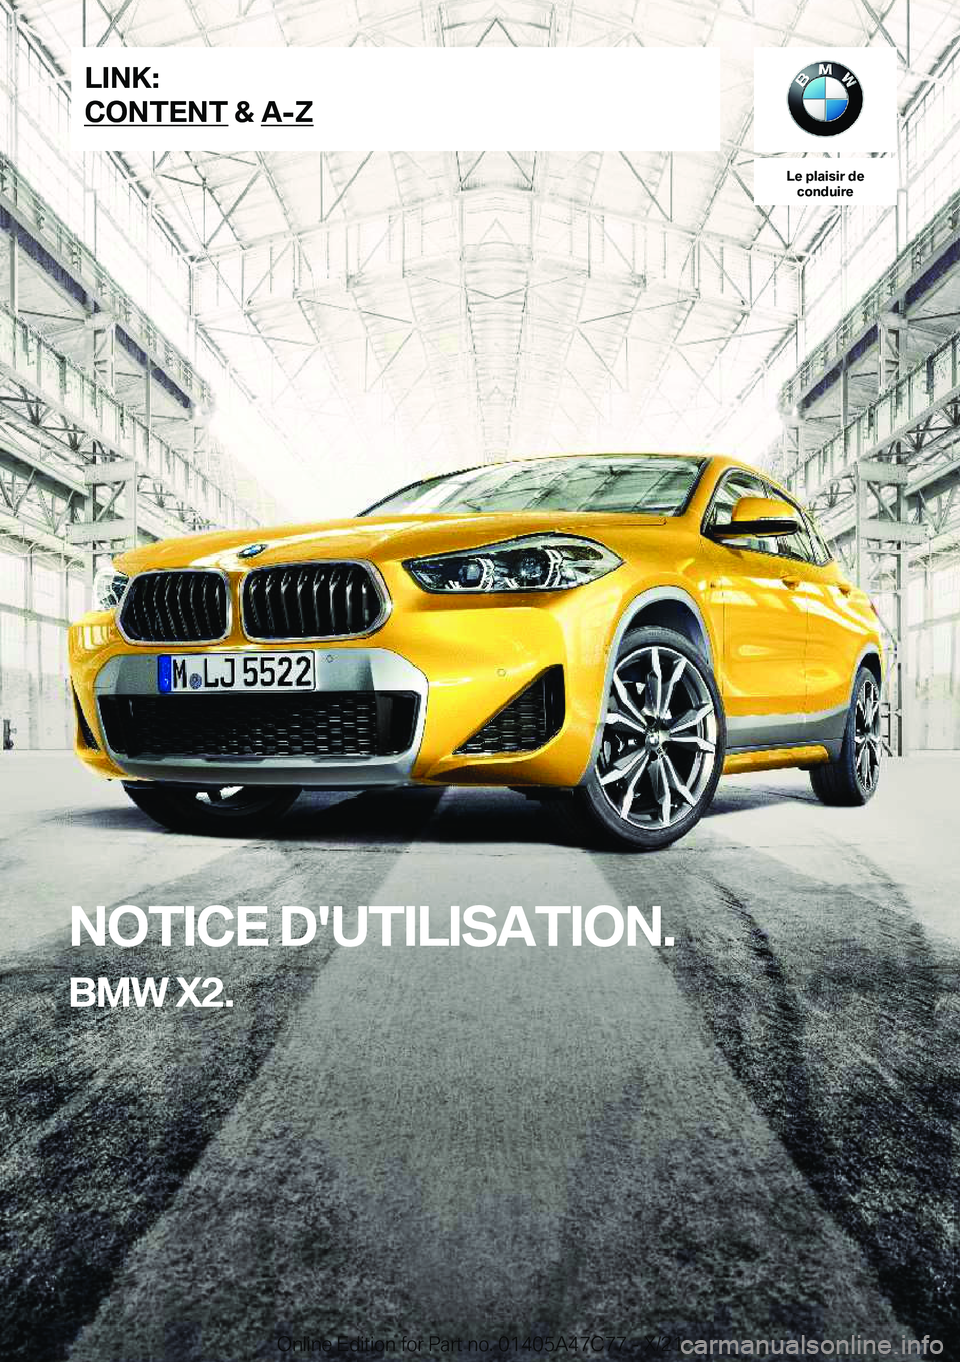 BMW X2 2022  Notices Demploi (in French) �L�e��p�l�a�i�s�i�r��d�e�c�o�n�d�u�i�r�e
�N�O�T�I�C�E��D�'�U�T�I�L�I�S�A�T�I�O�N�.
�B�M�W��X�2�.�L�I�N�K�:
�C�O�N�T�E�N�T��&��A�-�Z�O�n�l�i�n�e��E�d�i�t�i�o�n��f�o�r��P�a�r�t��n�o�.��0�